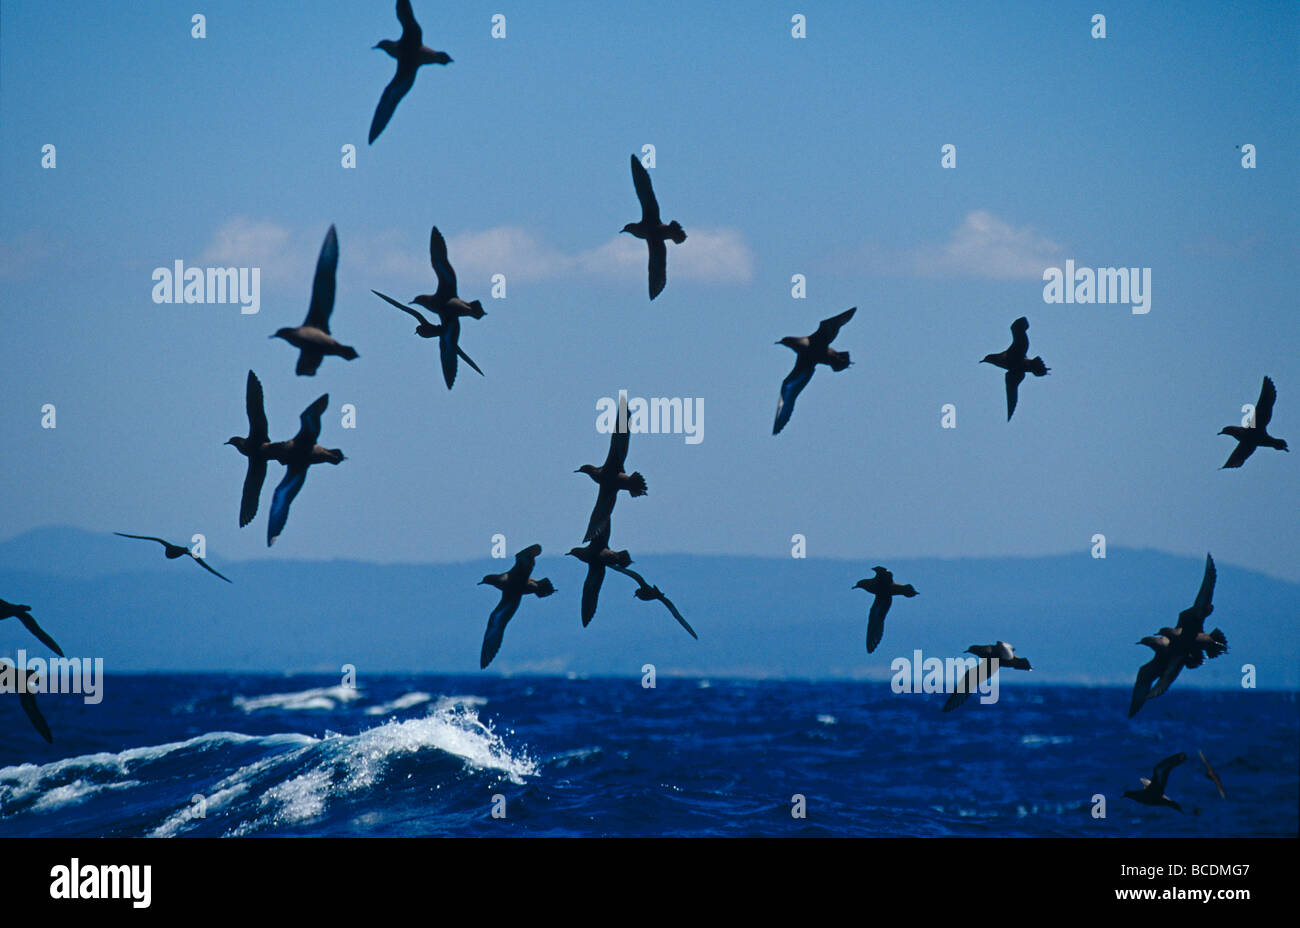 A flock of Short-Tailed Shearwaters soaring over a choppy ocean. Stock Photo